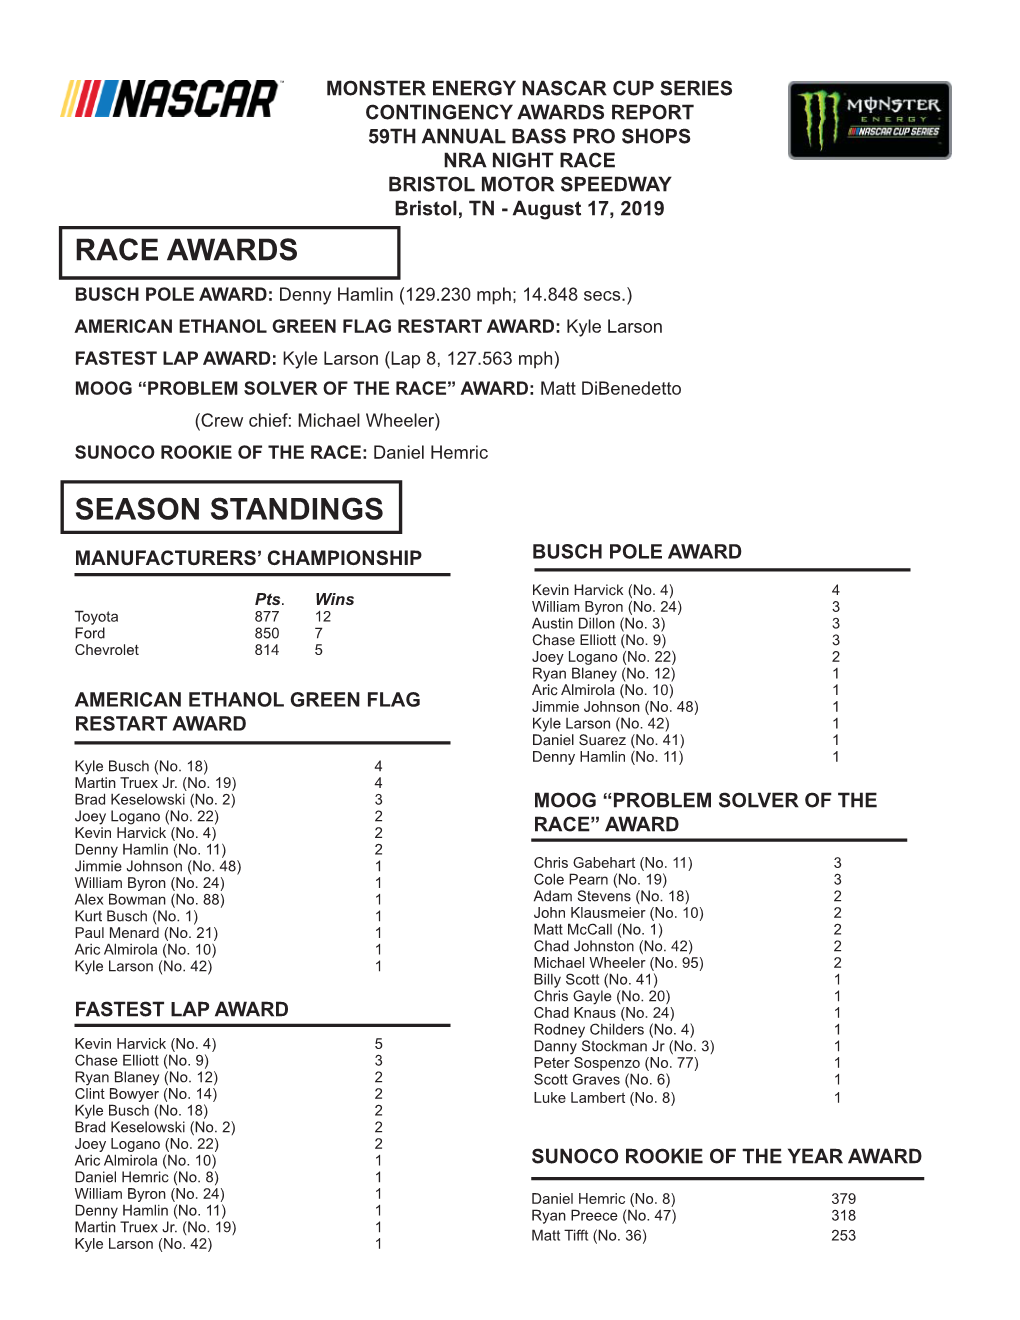 CONTINGENCY AWARDS REPORT 59TH ANNUAL BASS PRO SHOPS NRA NIGHT RACE BRISTOL MOTOR SPEEDWAY Bristol, TN - August 17, 2019 RACE AWARDS